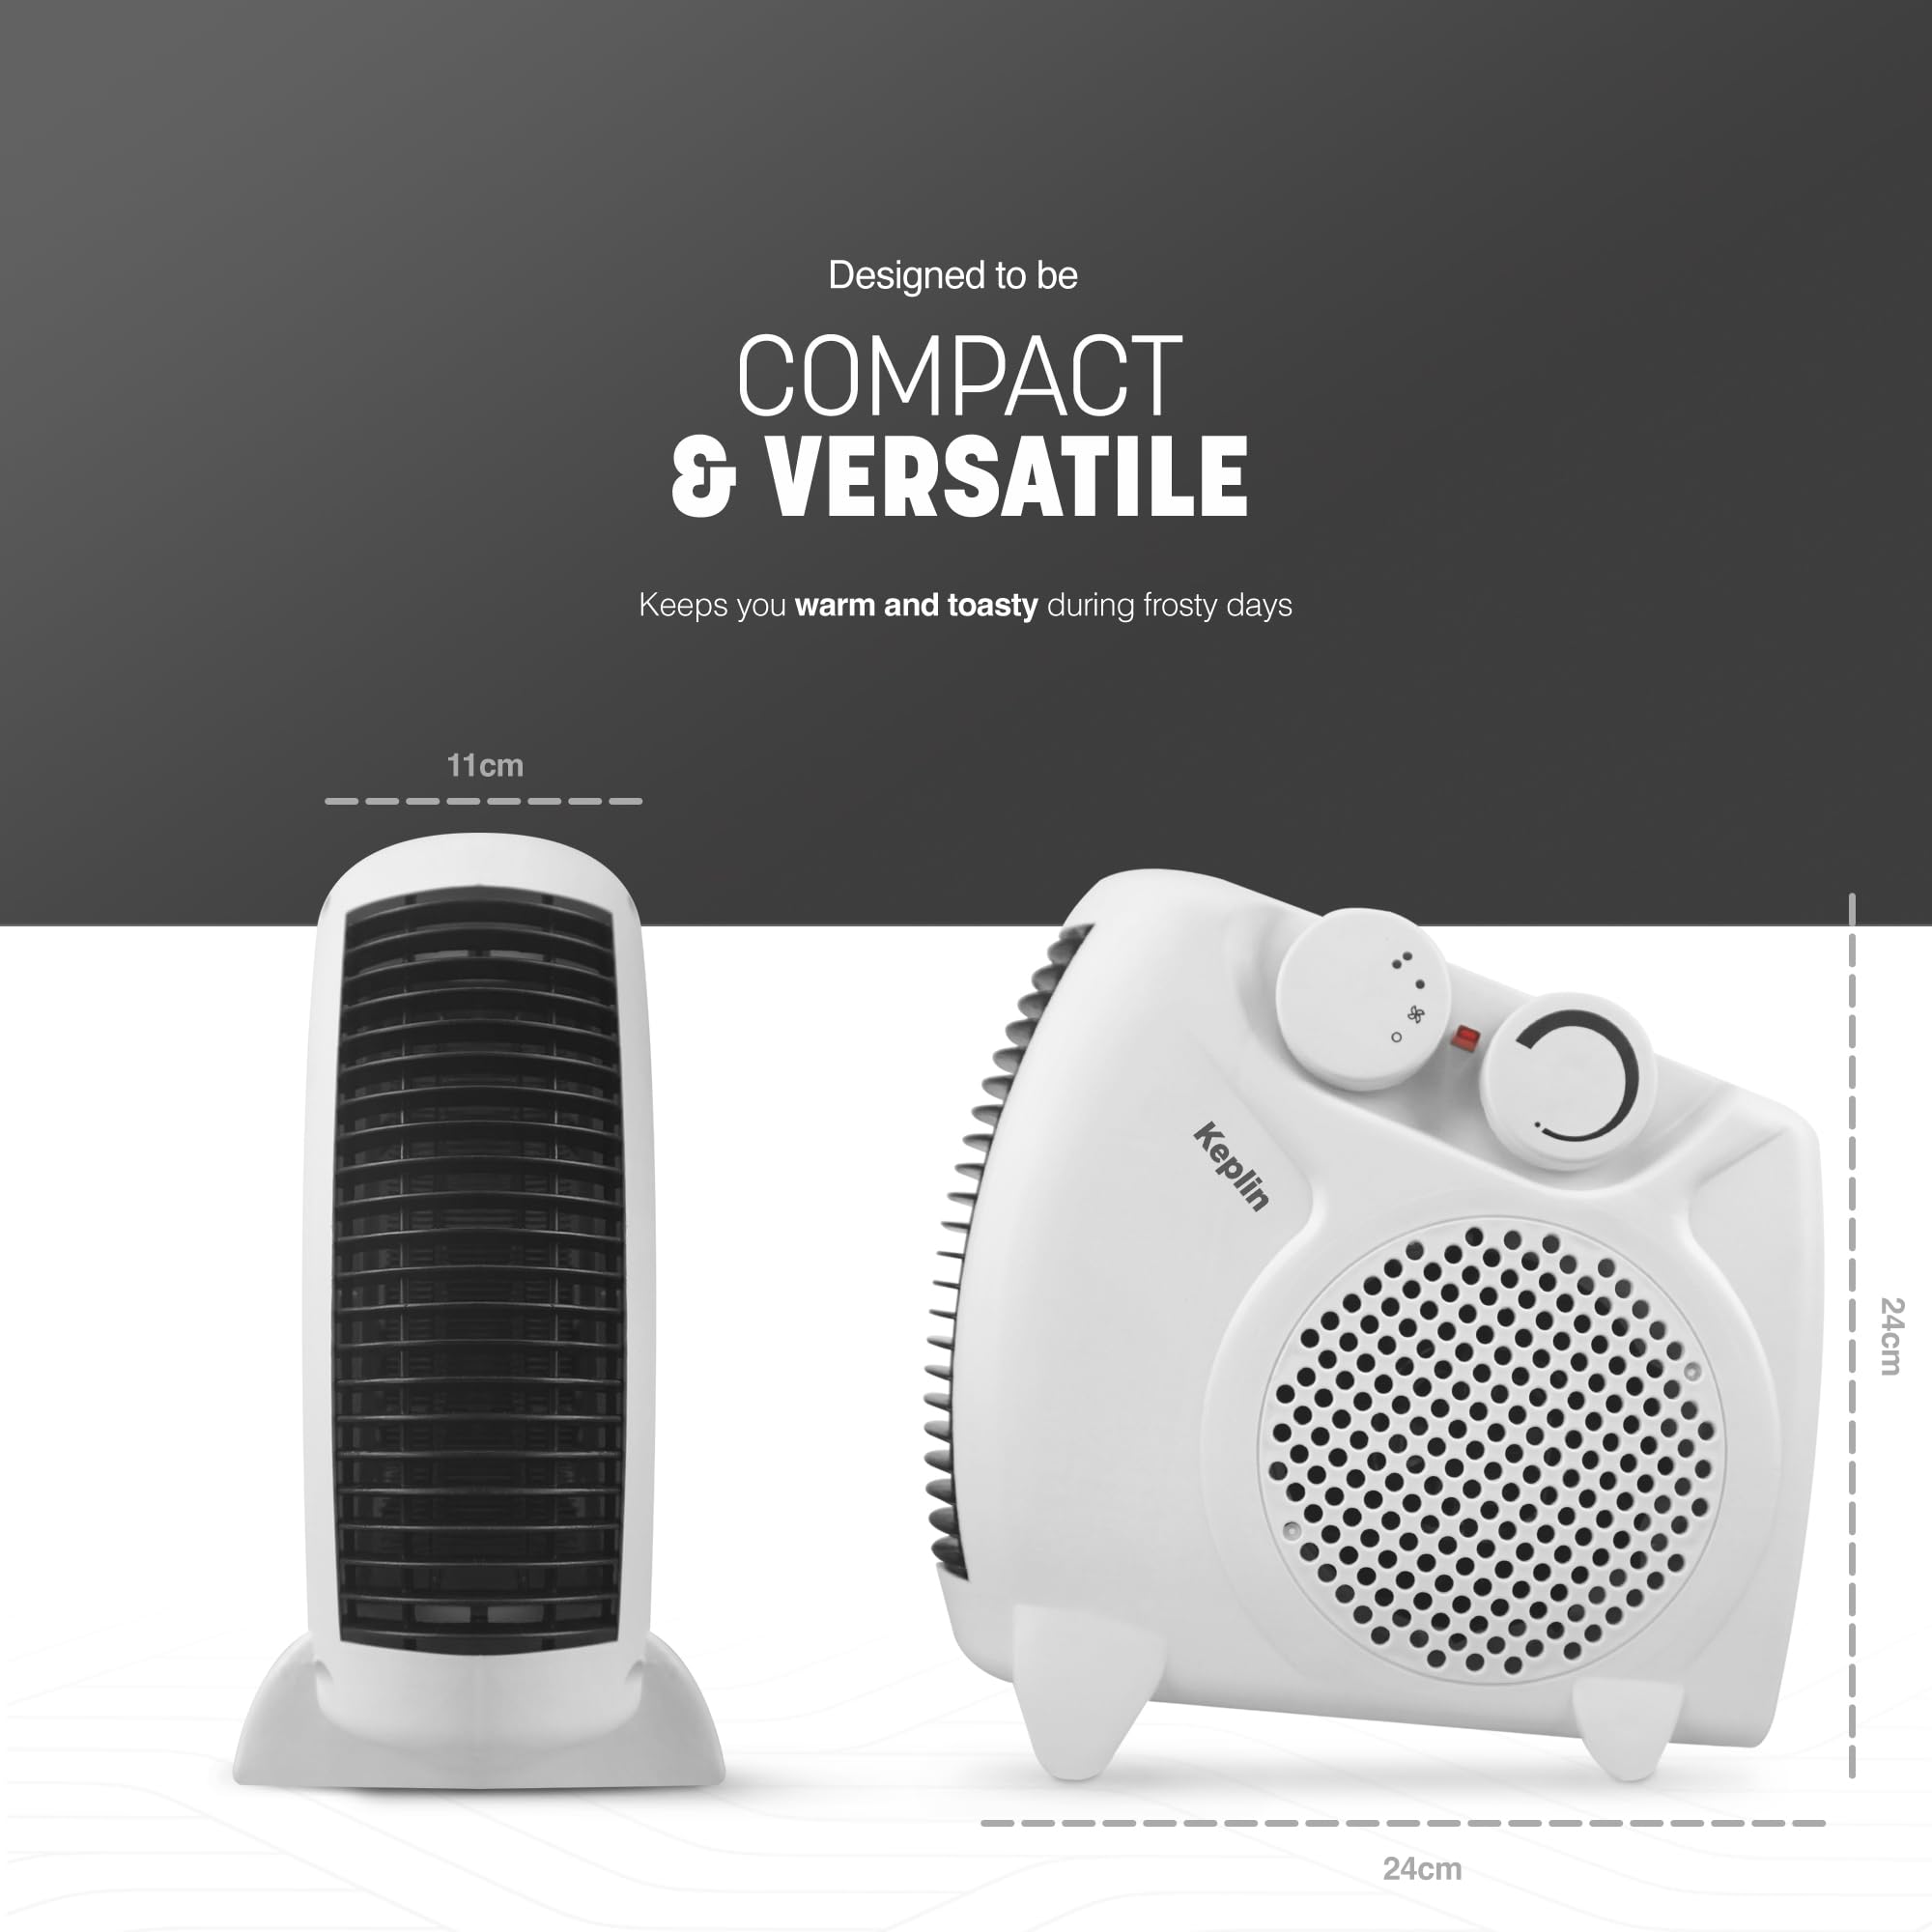 Portable Electric Fan Heater - Adjustable Thermostat, 2 Heat Setting and Overheat Protected